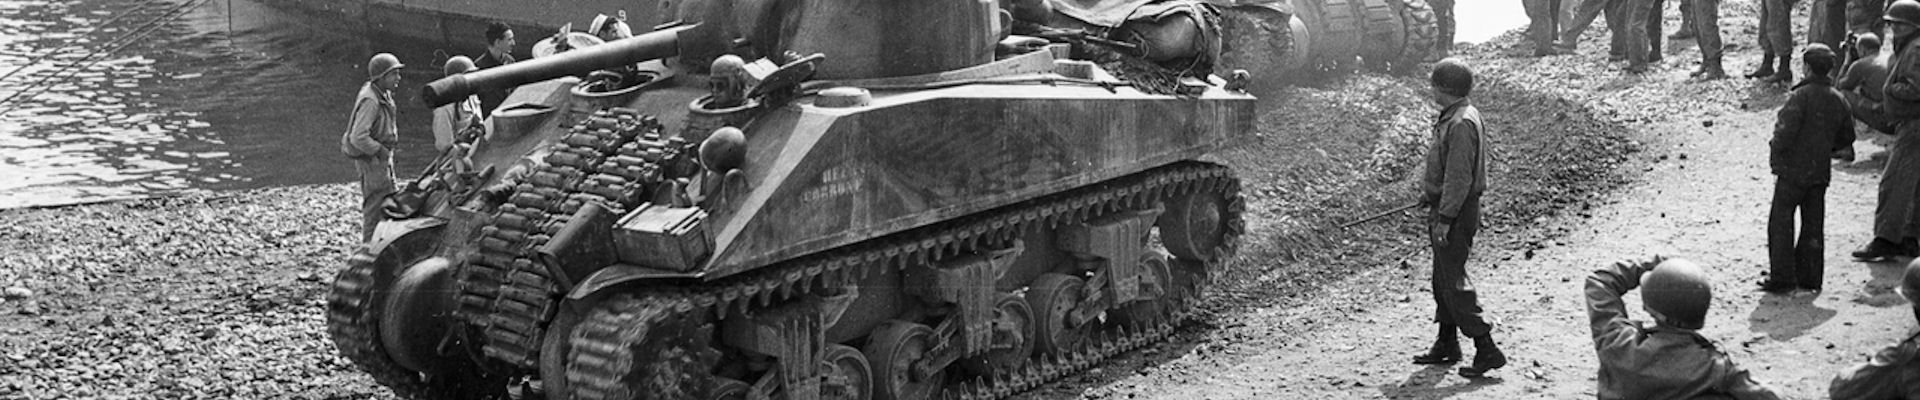 Picture of a US WW2 Tank with GI's looking on